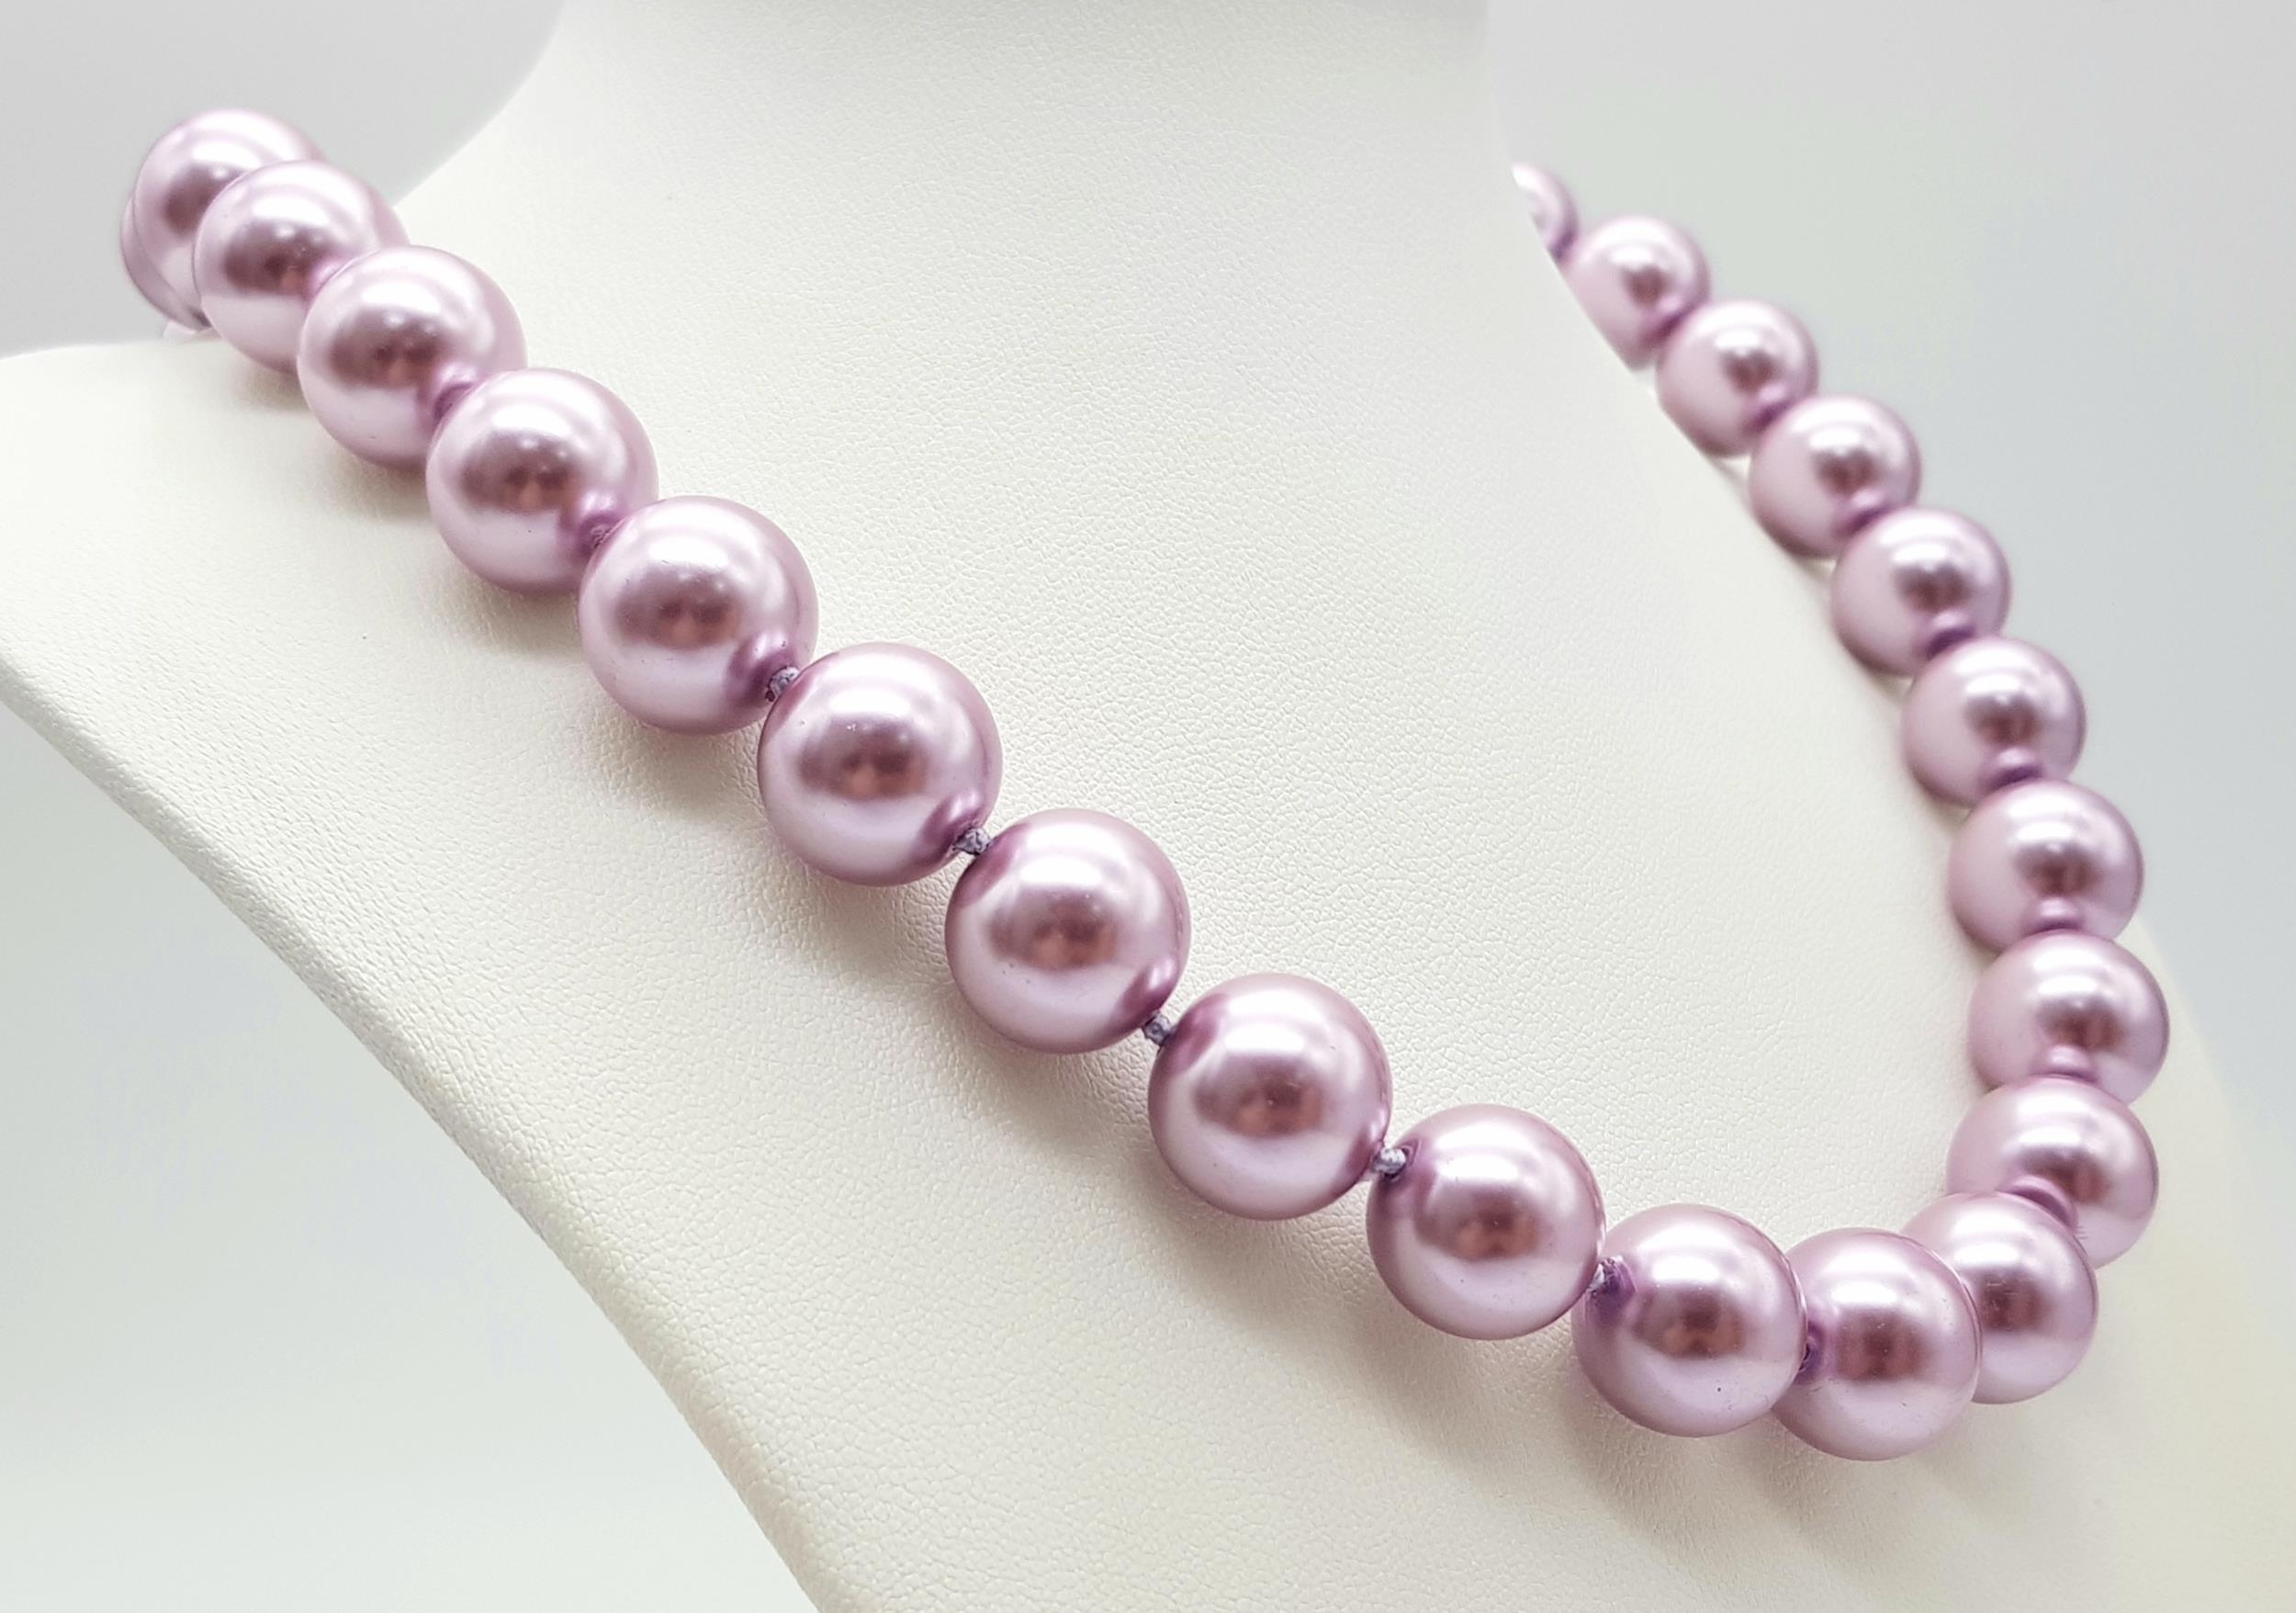 An Exotic Lavender South Sea Pearl Shell Beaded Necklace. 14mm beads. 44cm necklace length - Image 2 of 4